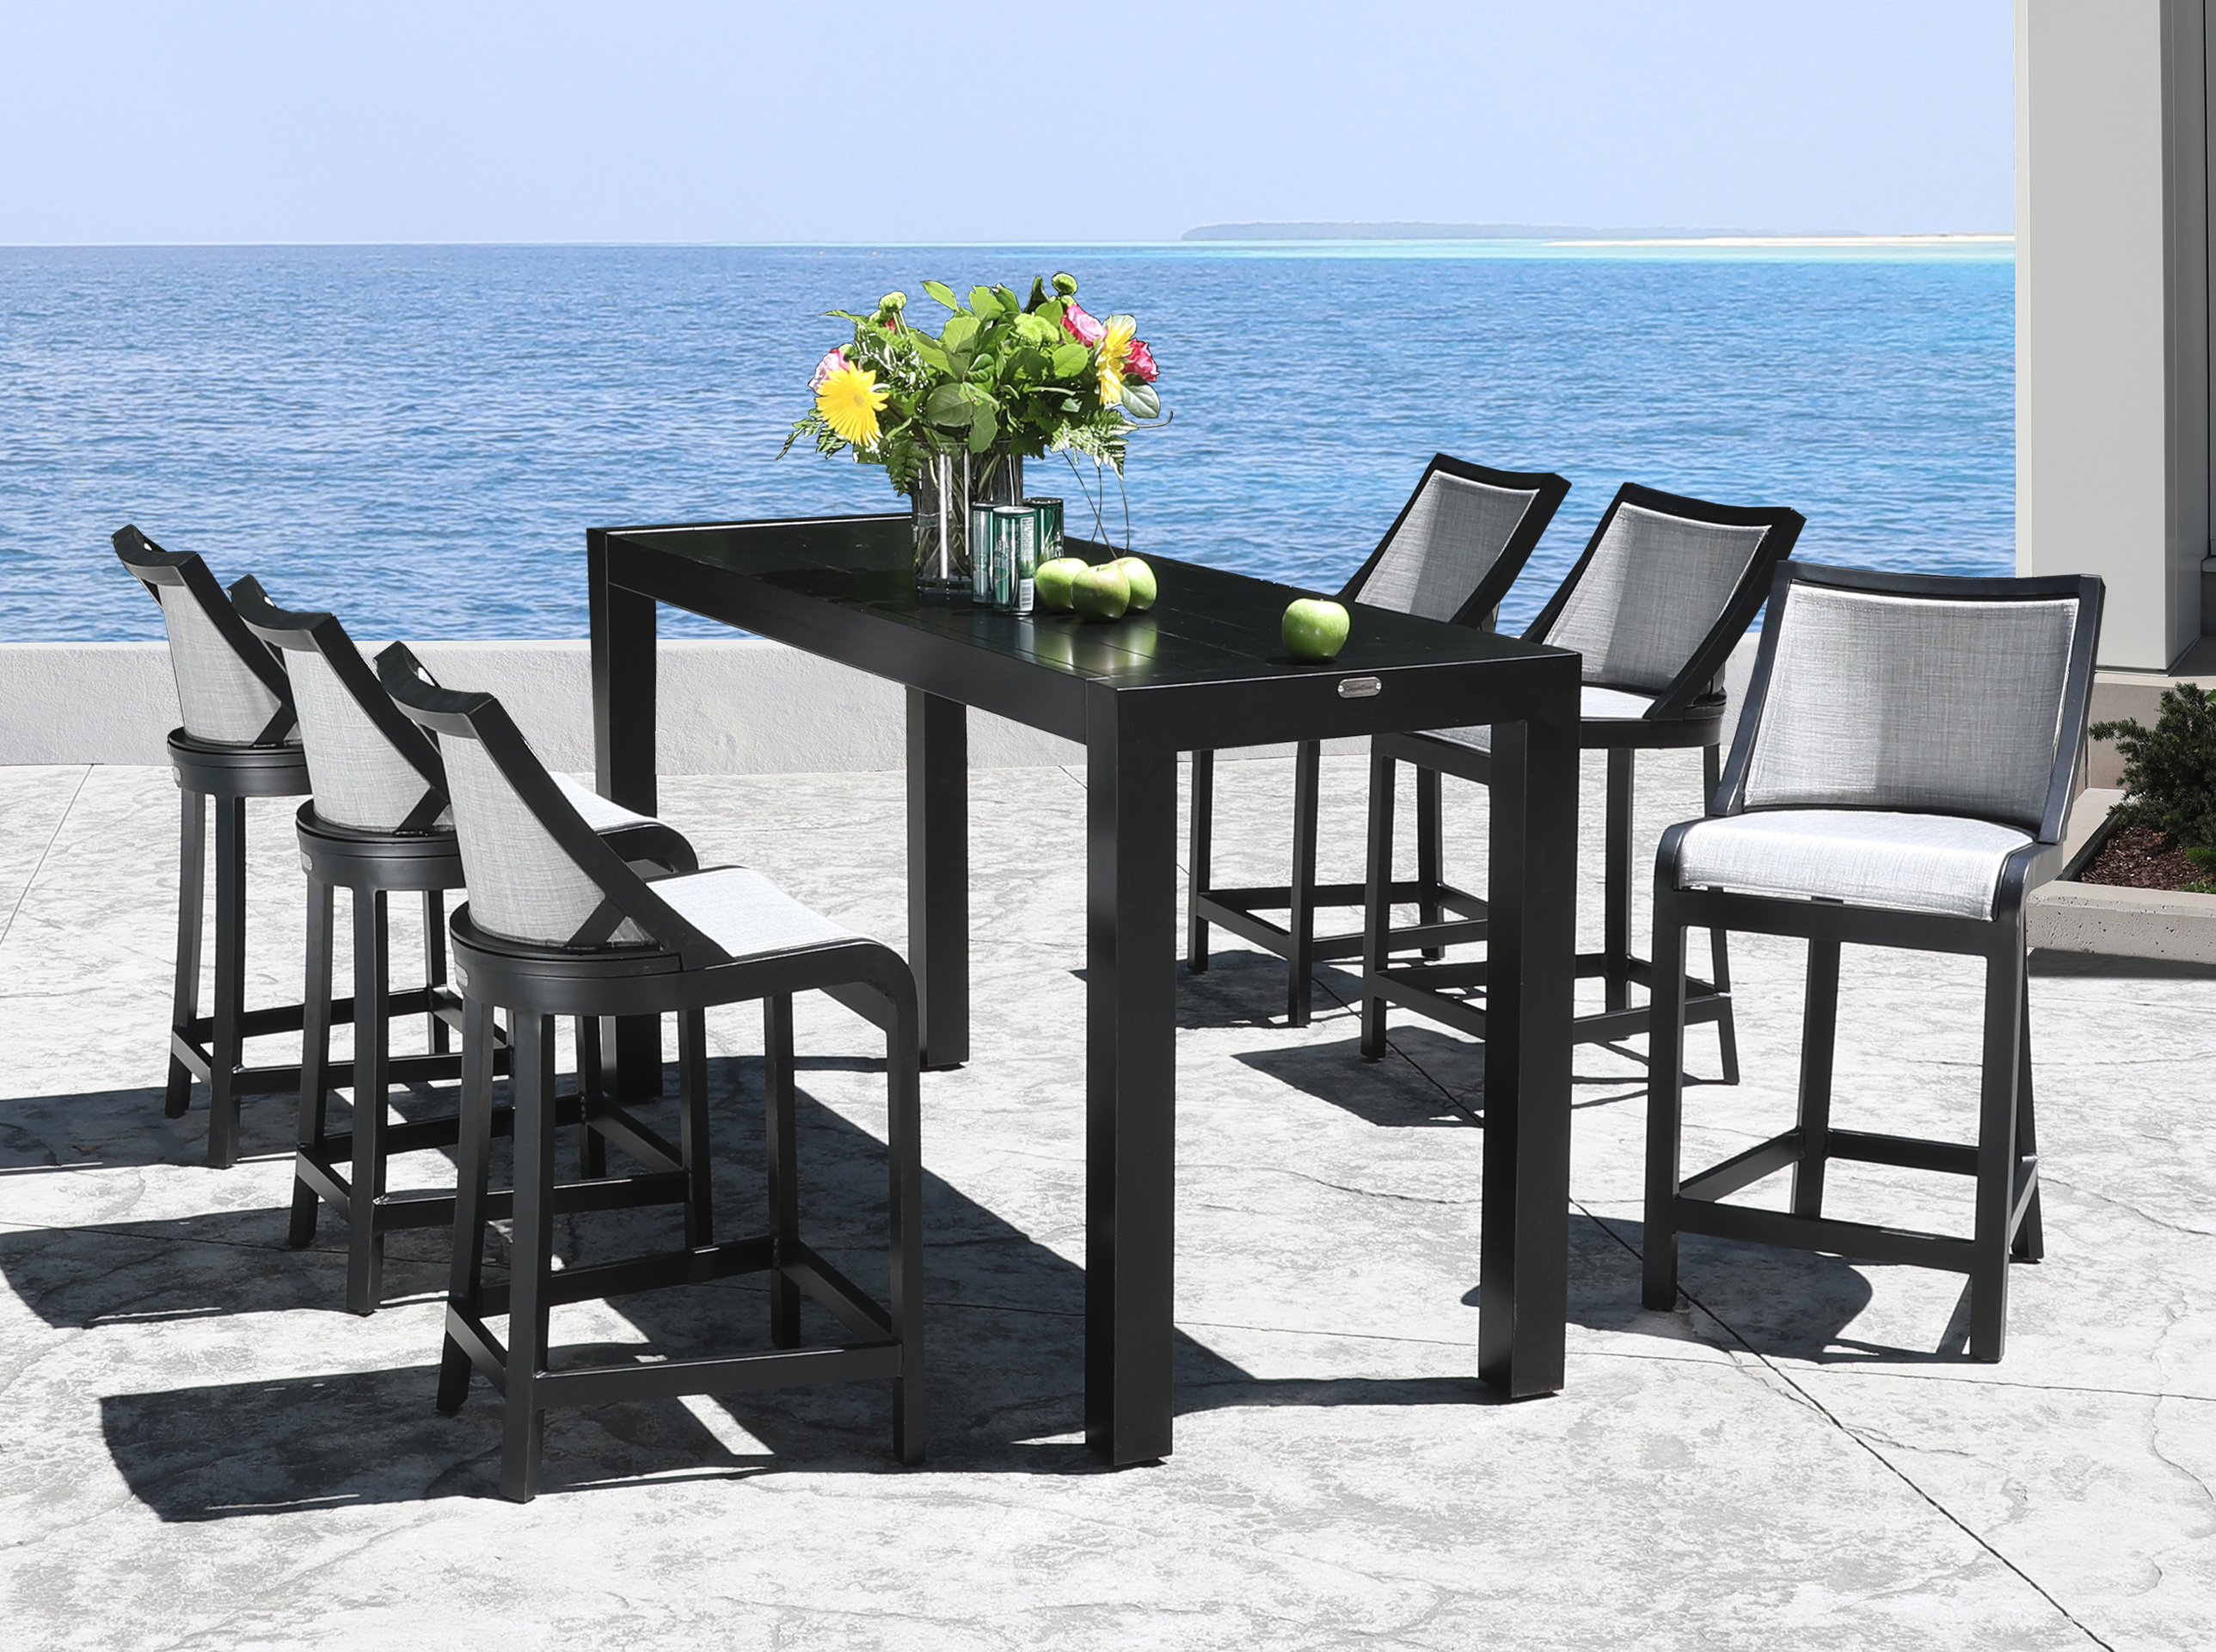 Your Need To Know Guide Before Buying An Outdoor Bar Stool with regard to dimensions 2577 X 1921